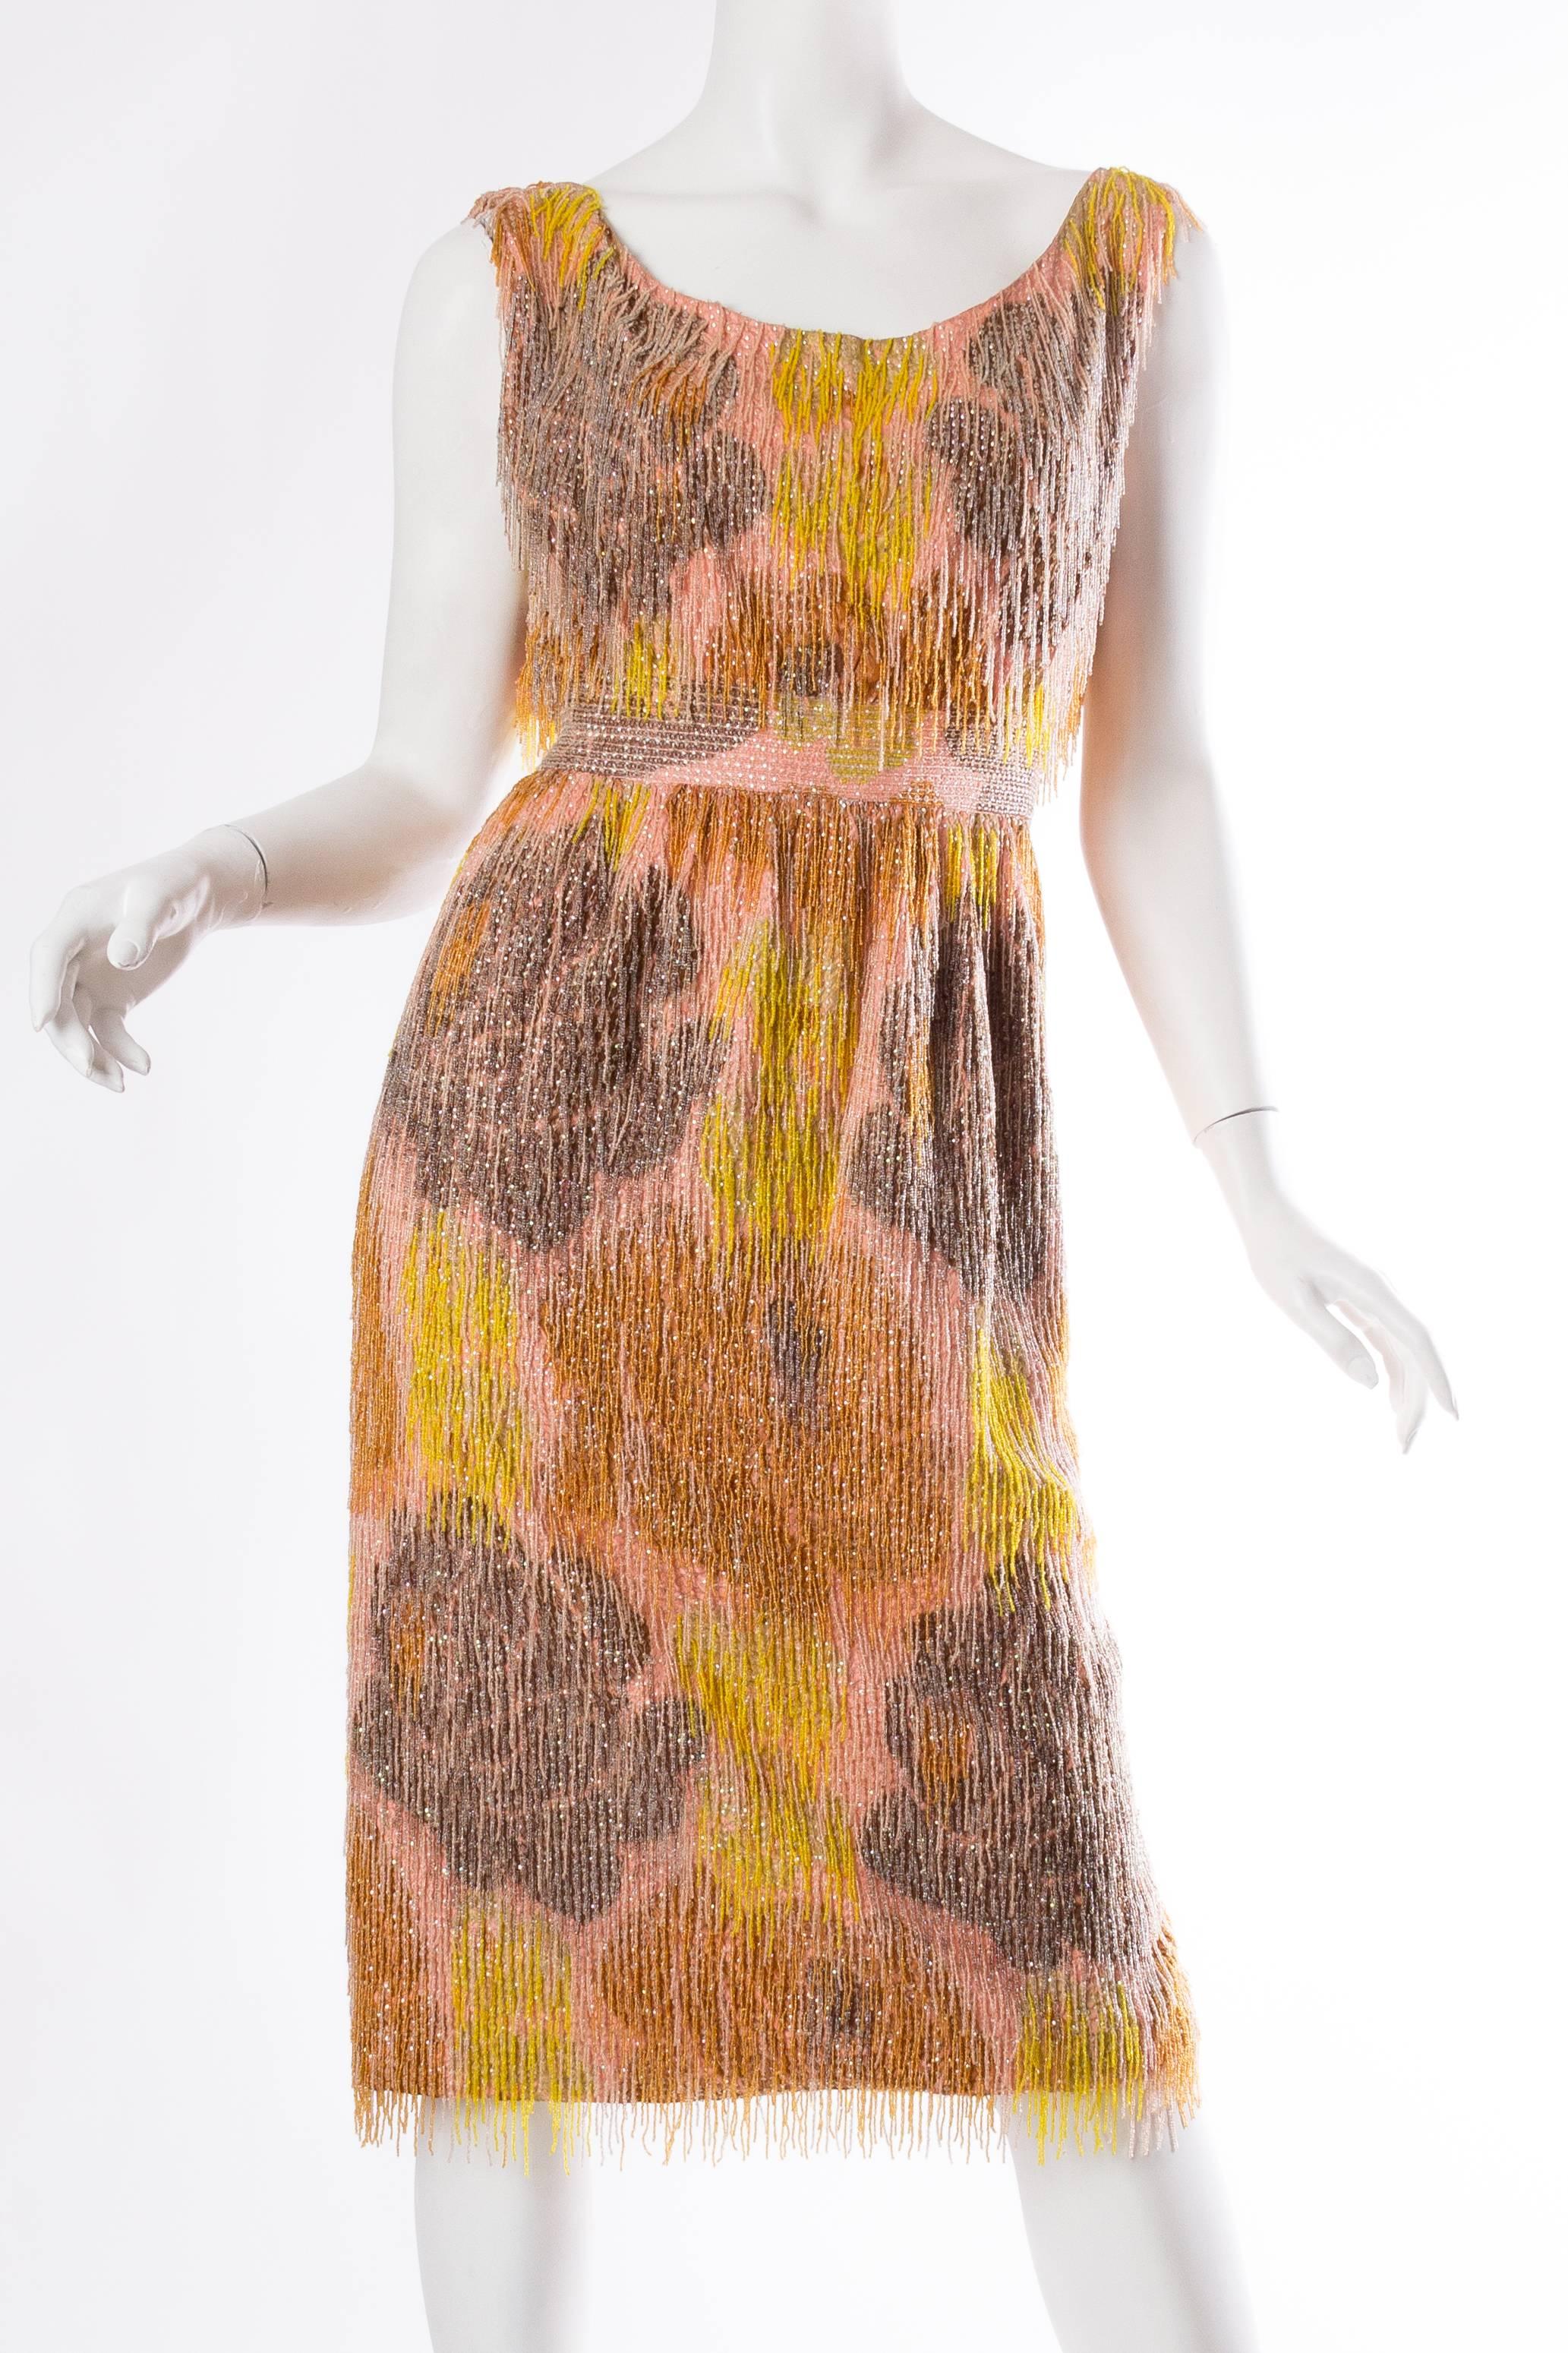 1950S CARVEN Amber Haute Couture Silk Taffeta Handwoven Floral Ikat Cocktail Dress Covered In Beaded Fringe